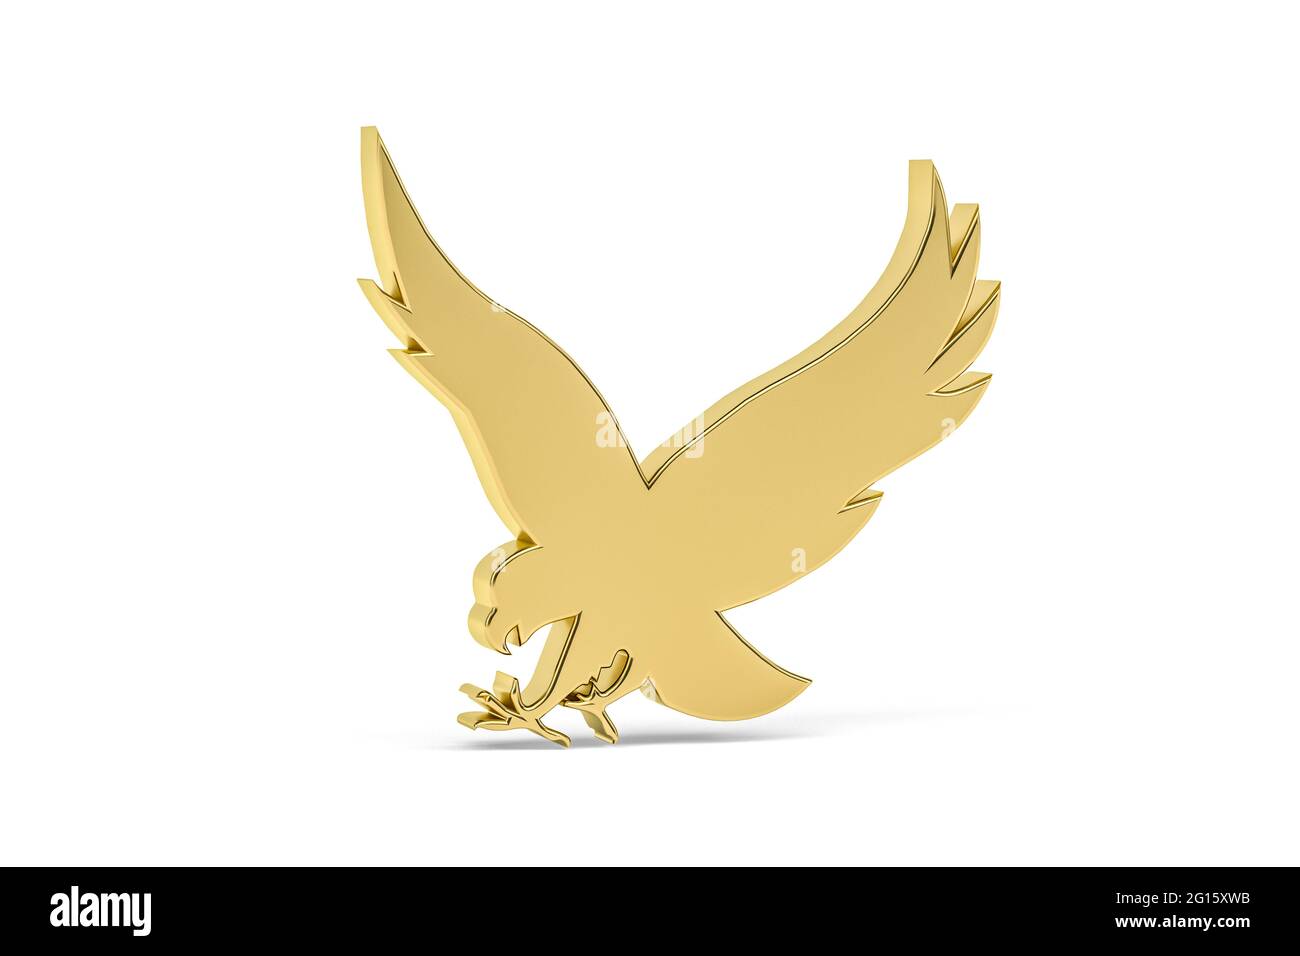 Golden 3d eagle icon isolated on white background - 3d render Stock Photo -  Alamy